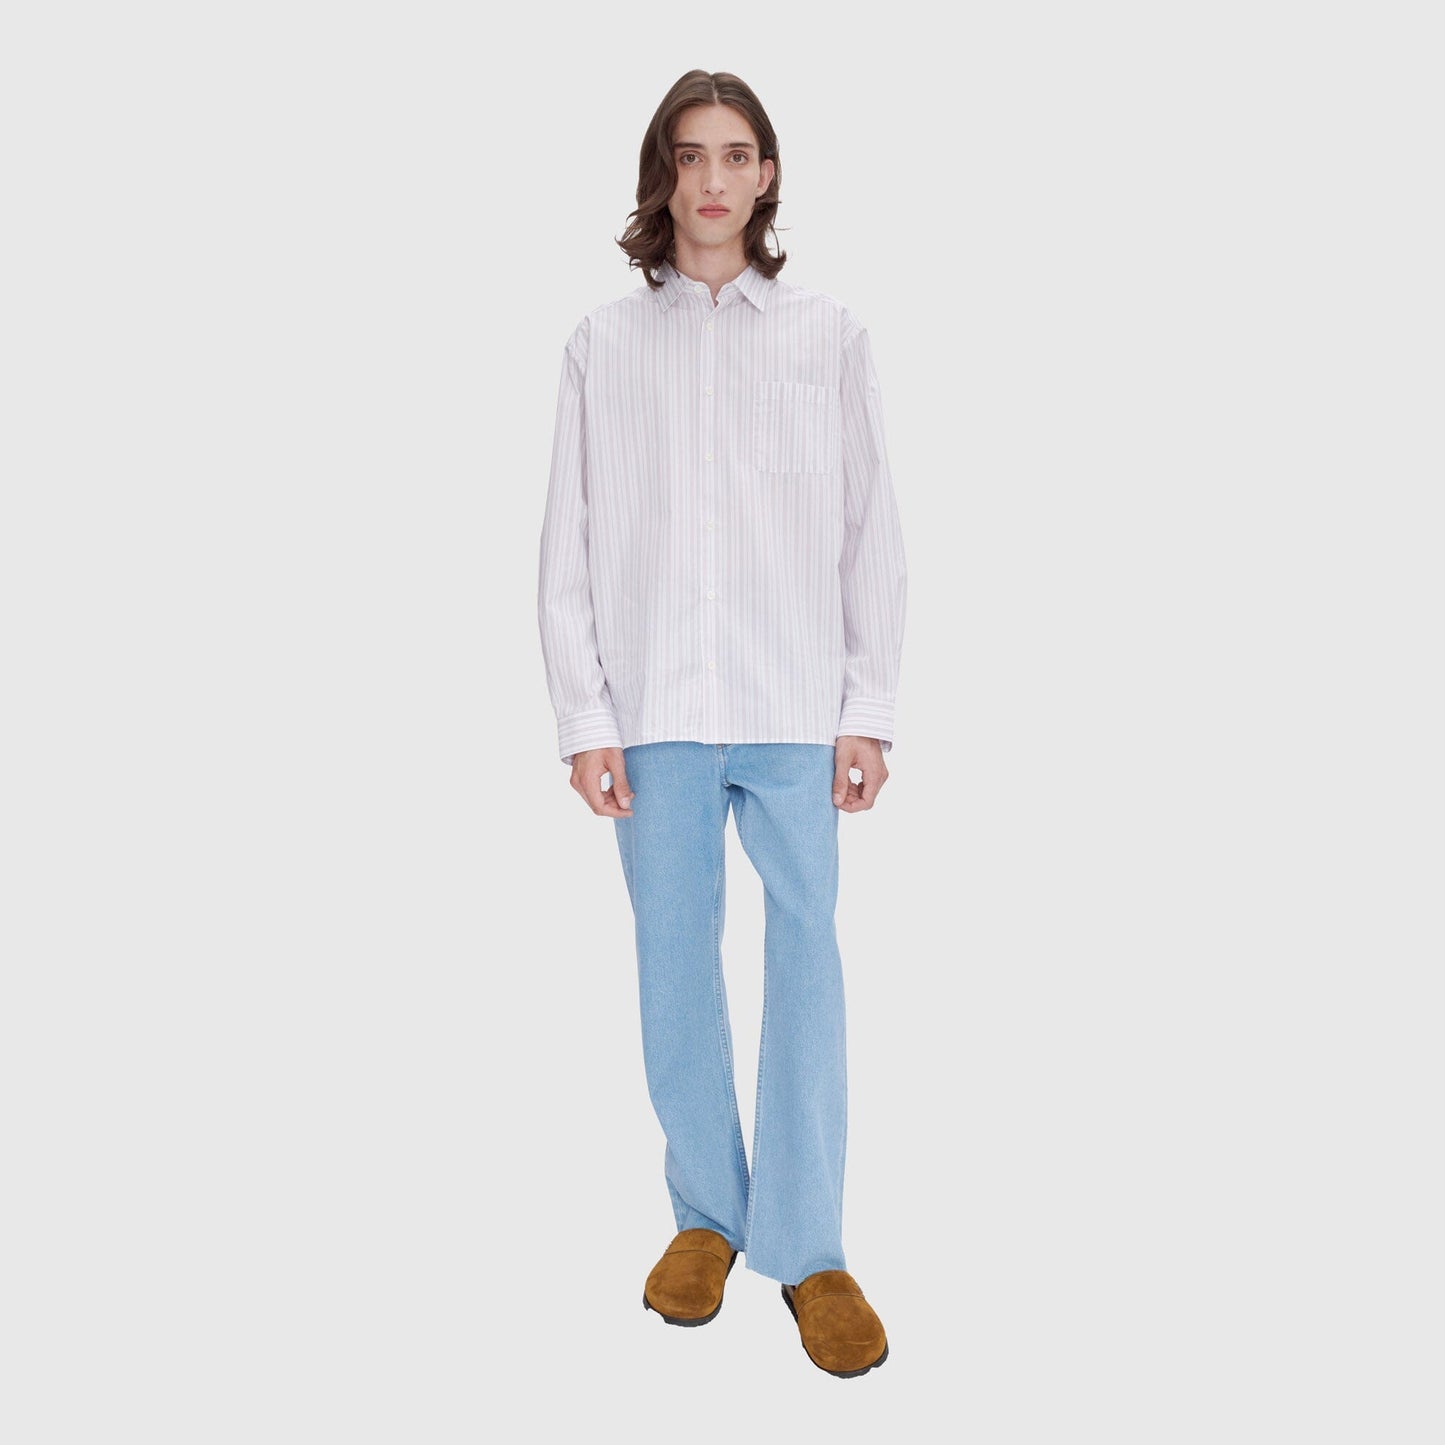 A.P.C Raw Relaxed Jeans - Light Blue Pants A.P.C 